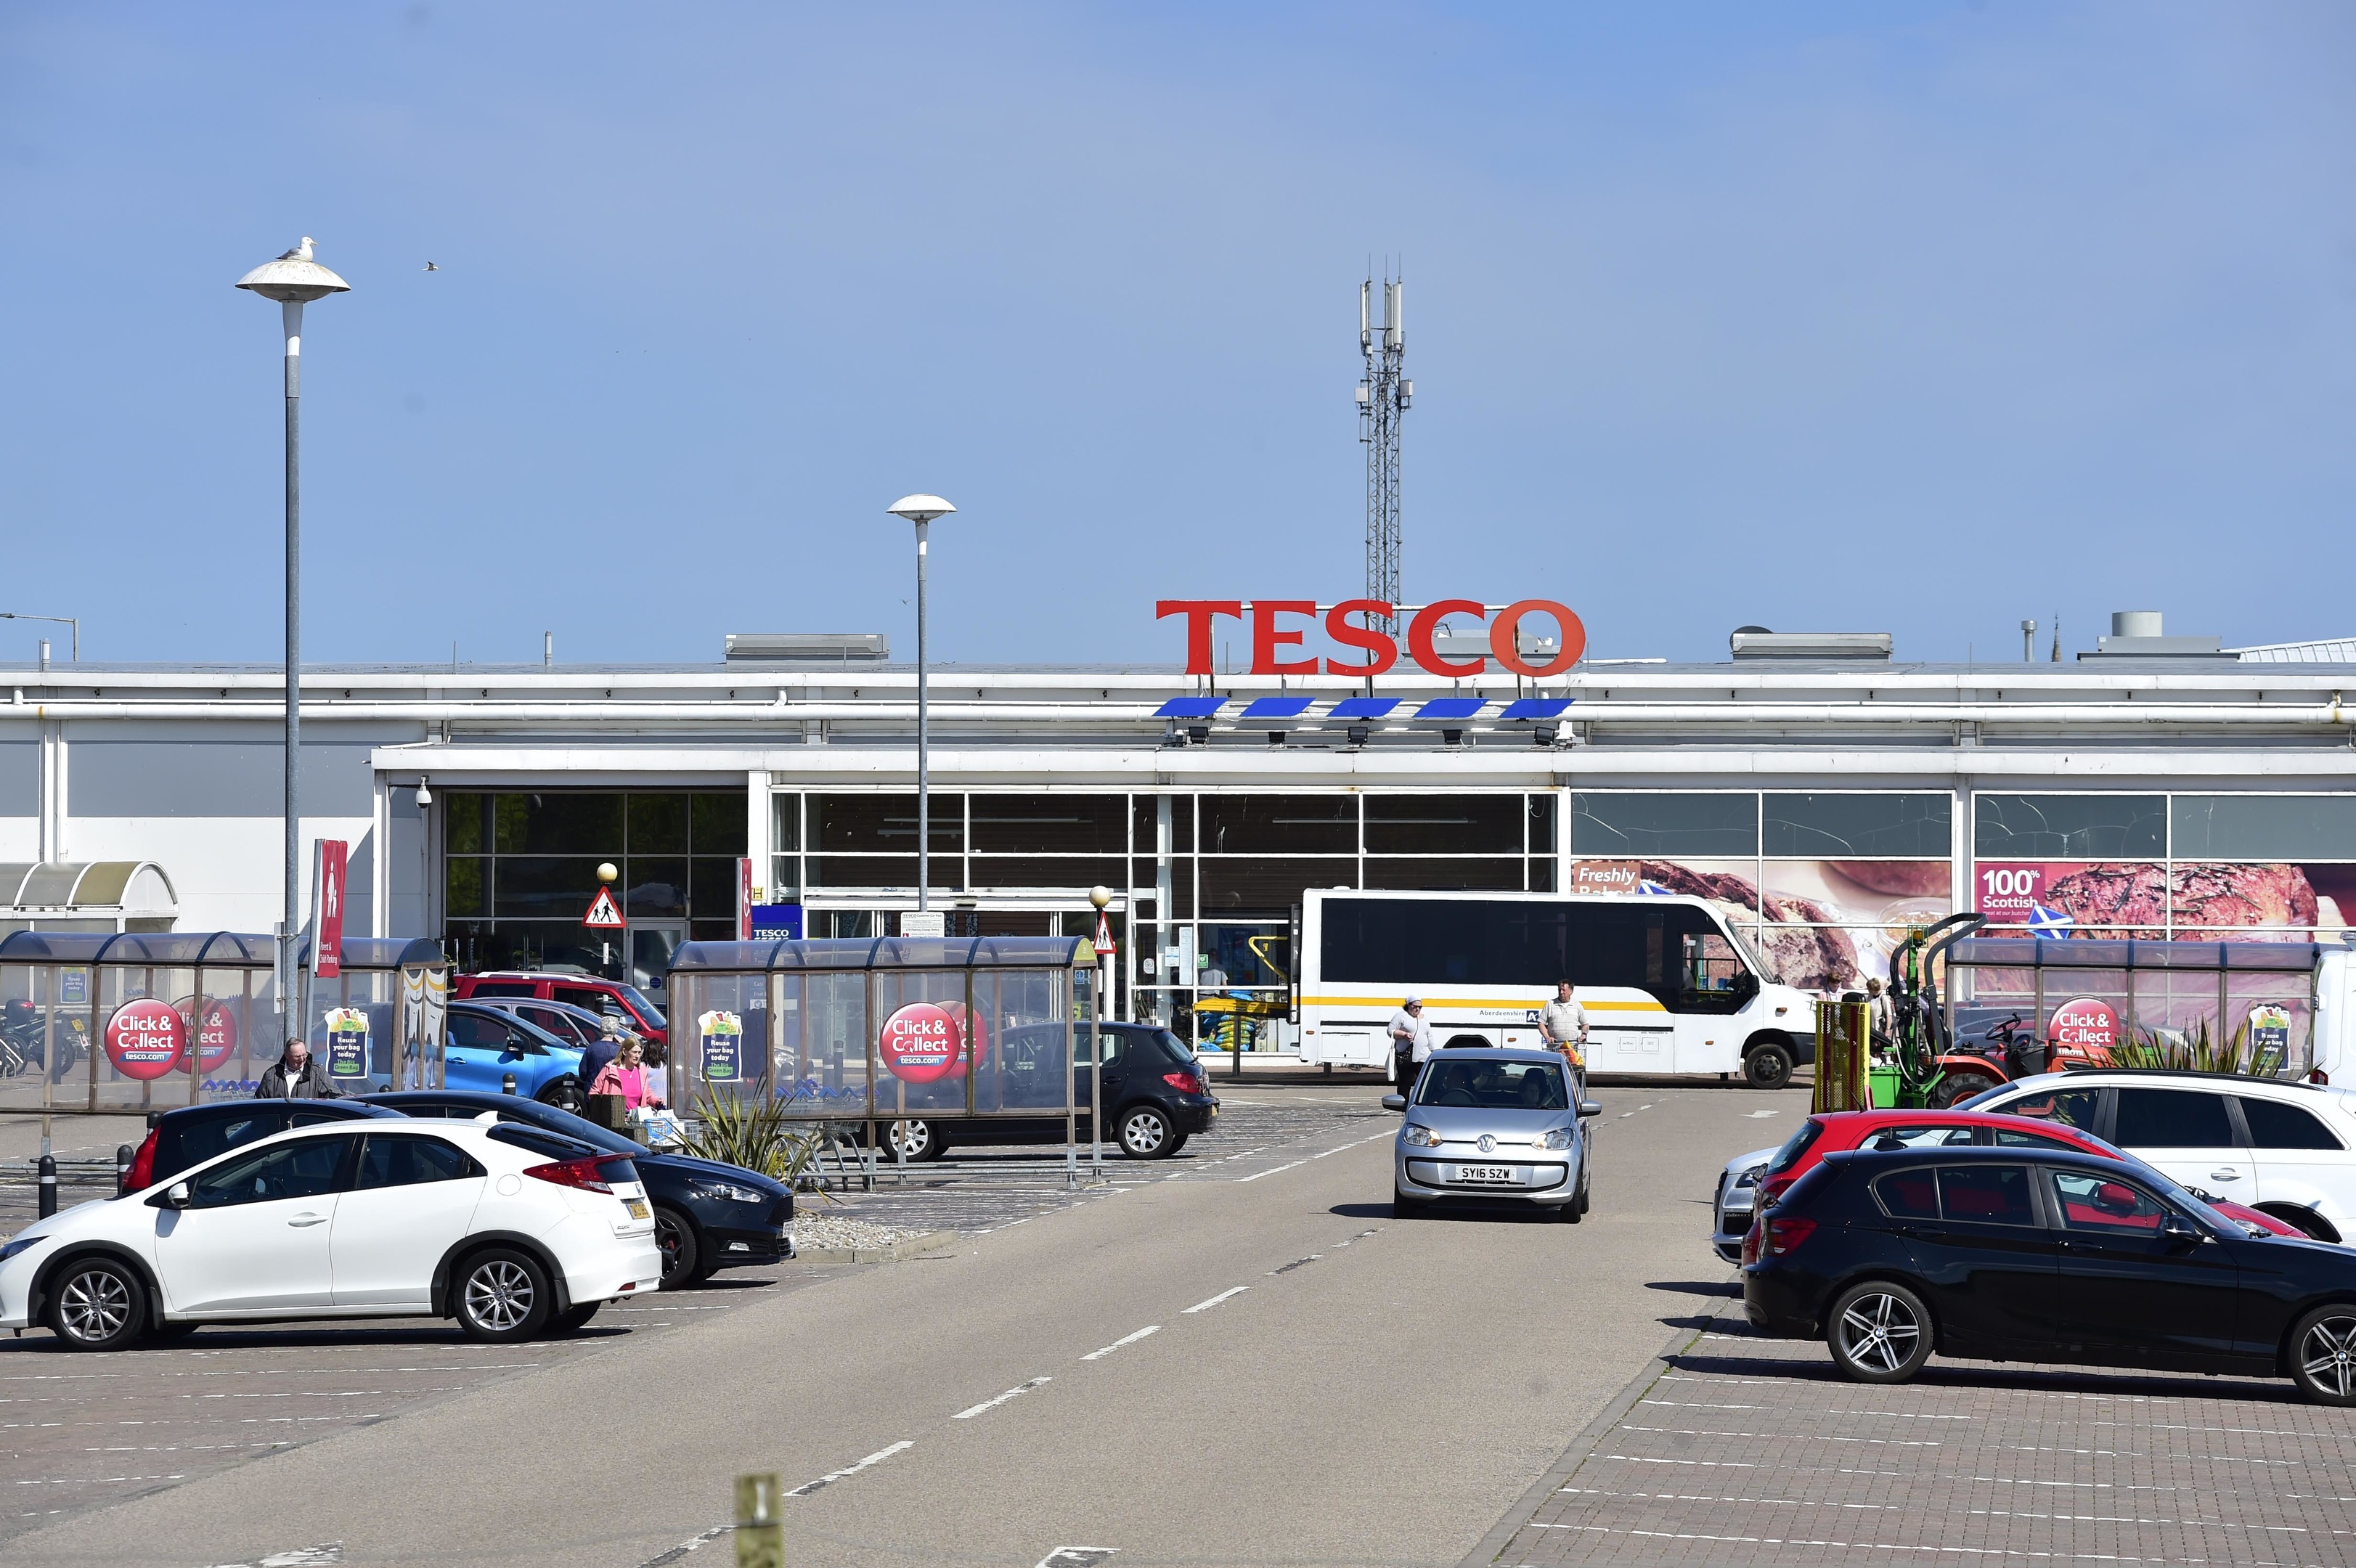 The Tesco supermarket in Fraserburgh where the alleged incident happened.